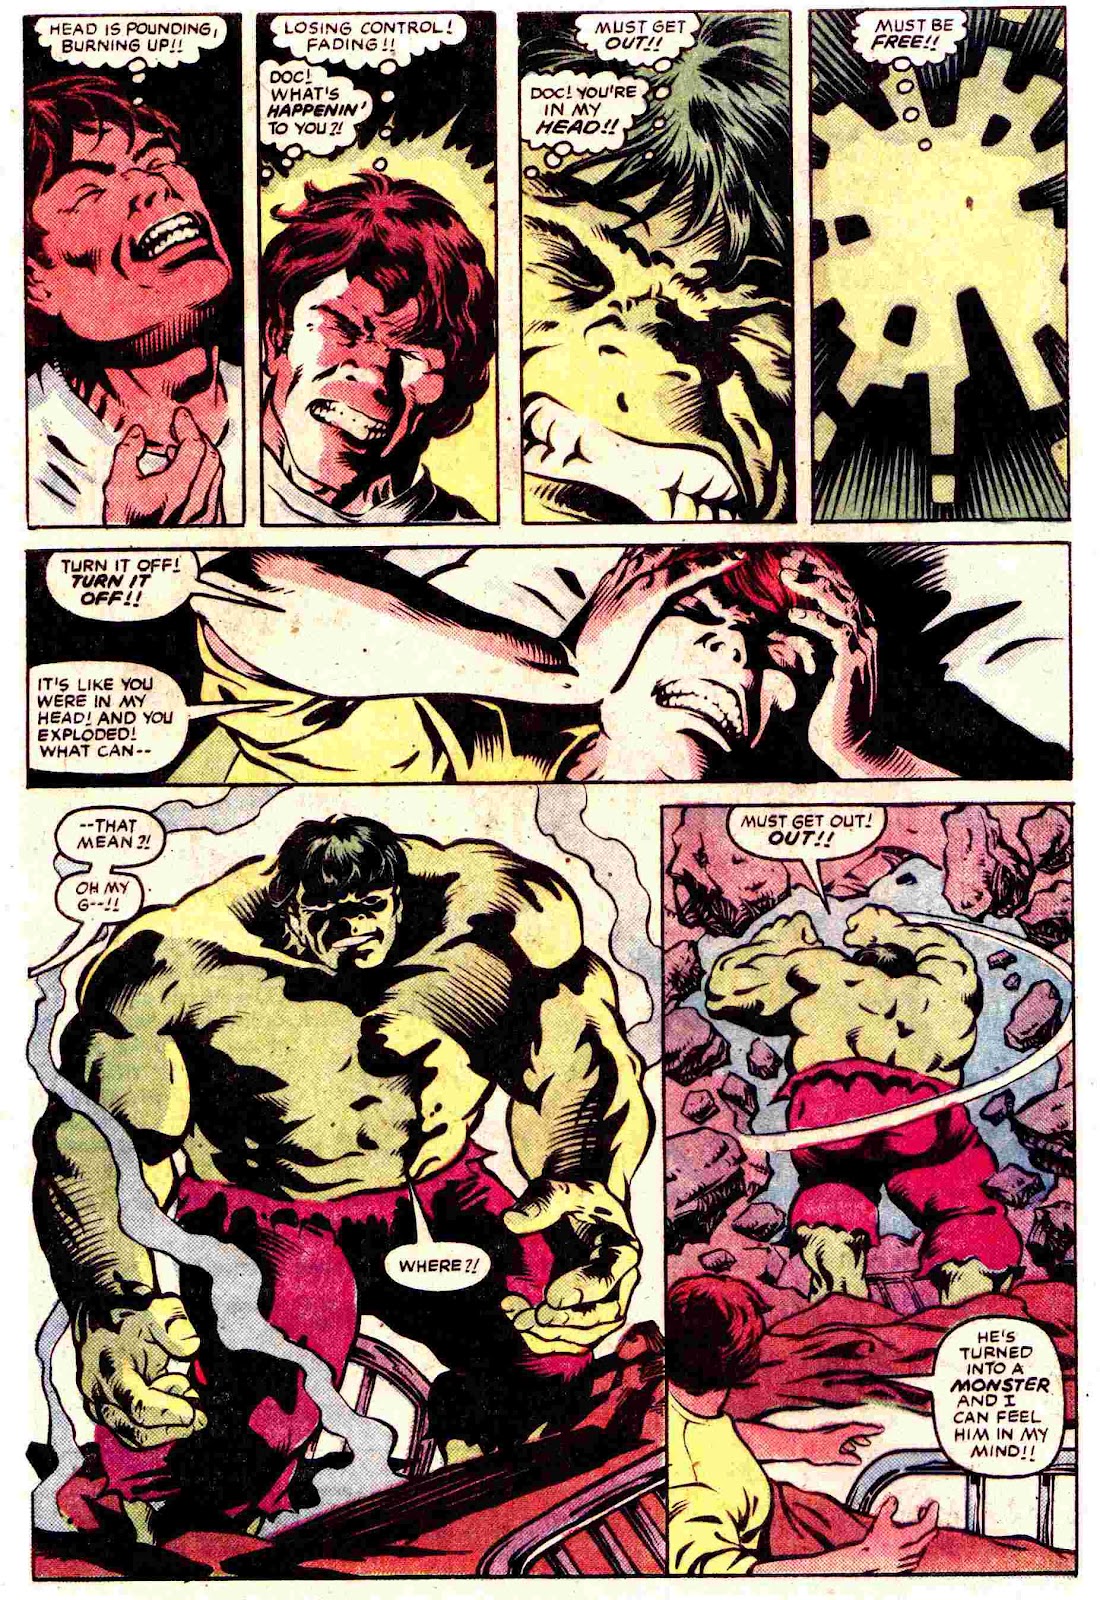 What If? (1977) issue 45 - The Hulk went Berserk - Page 6